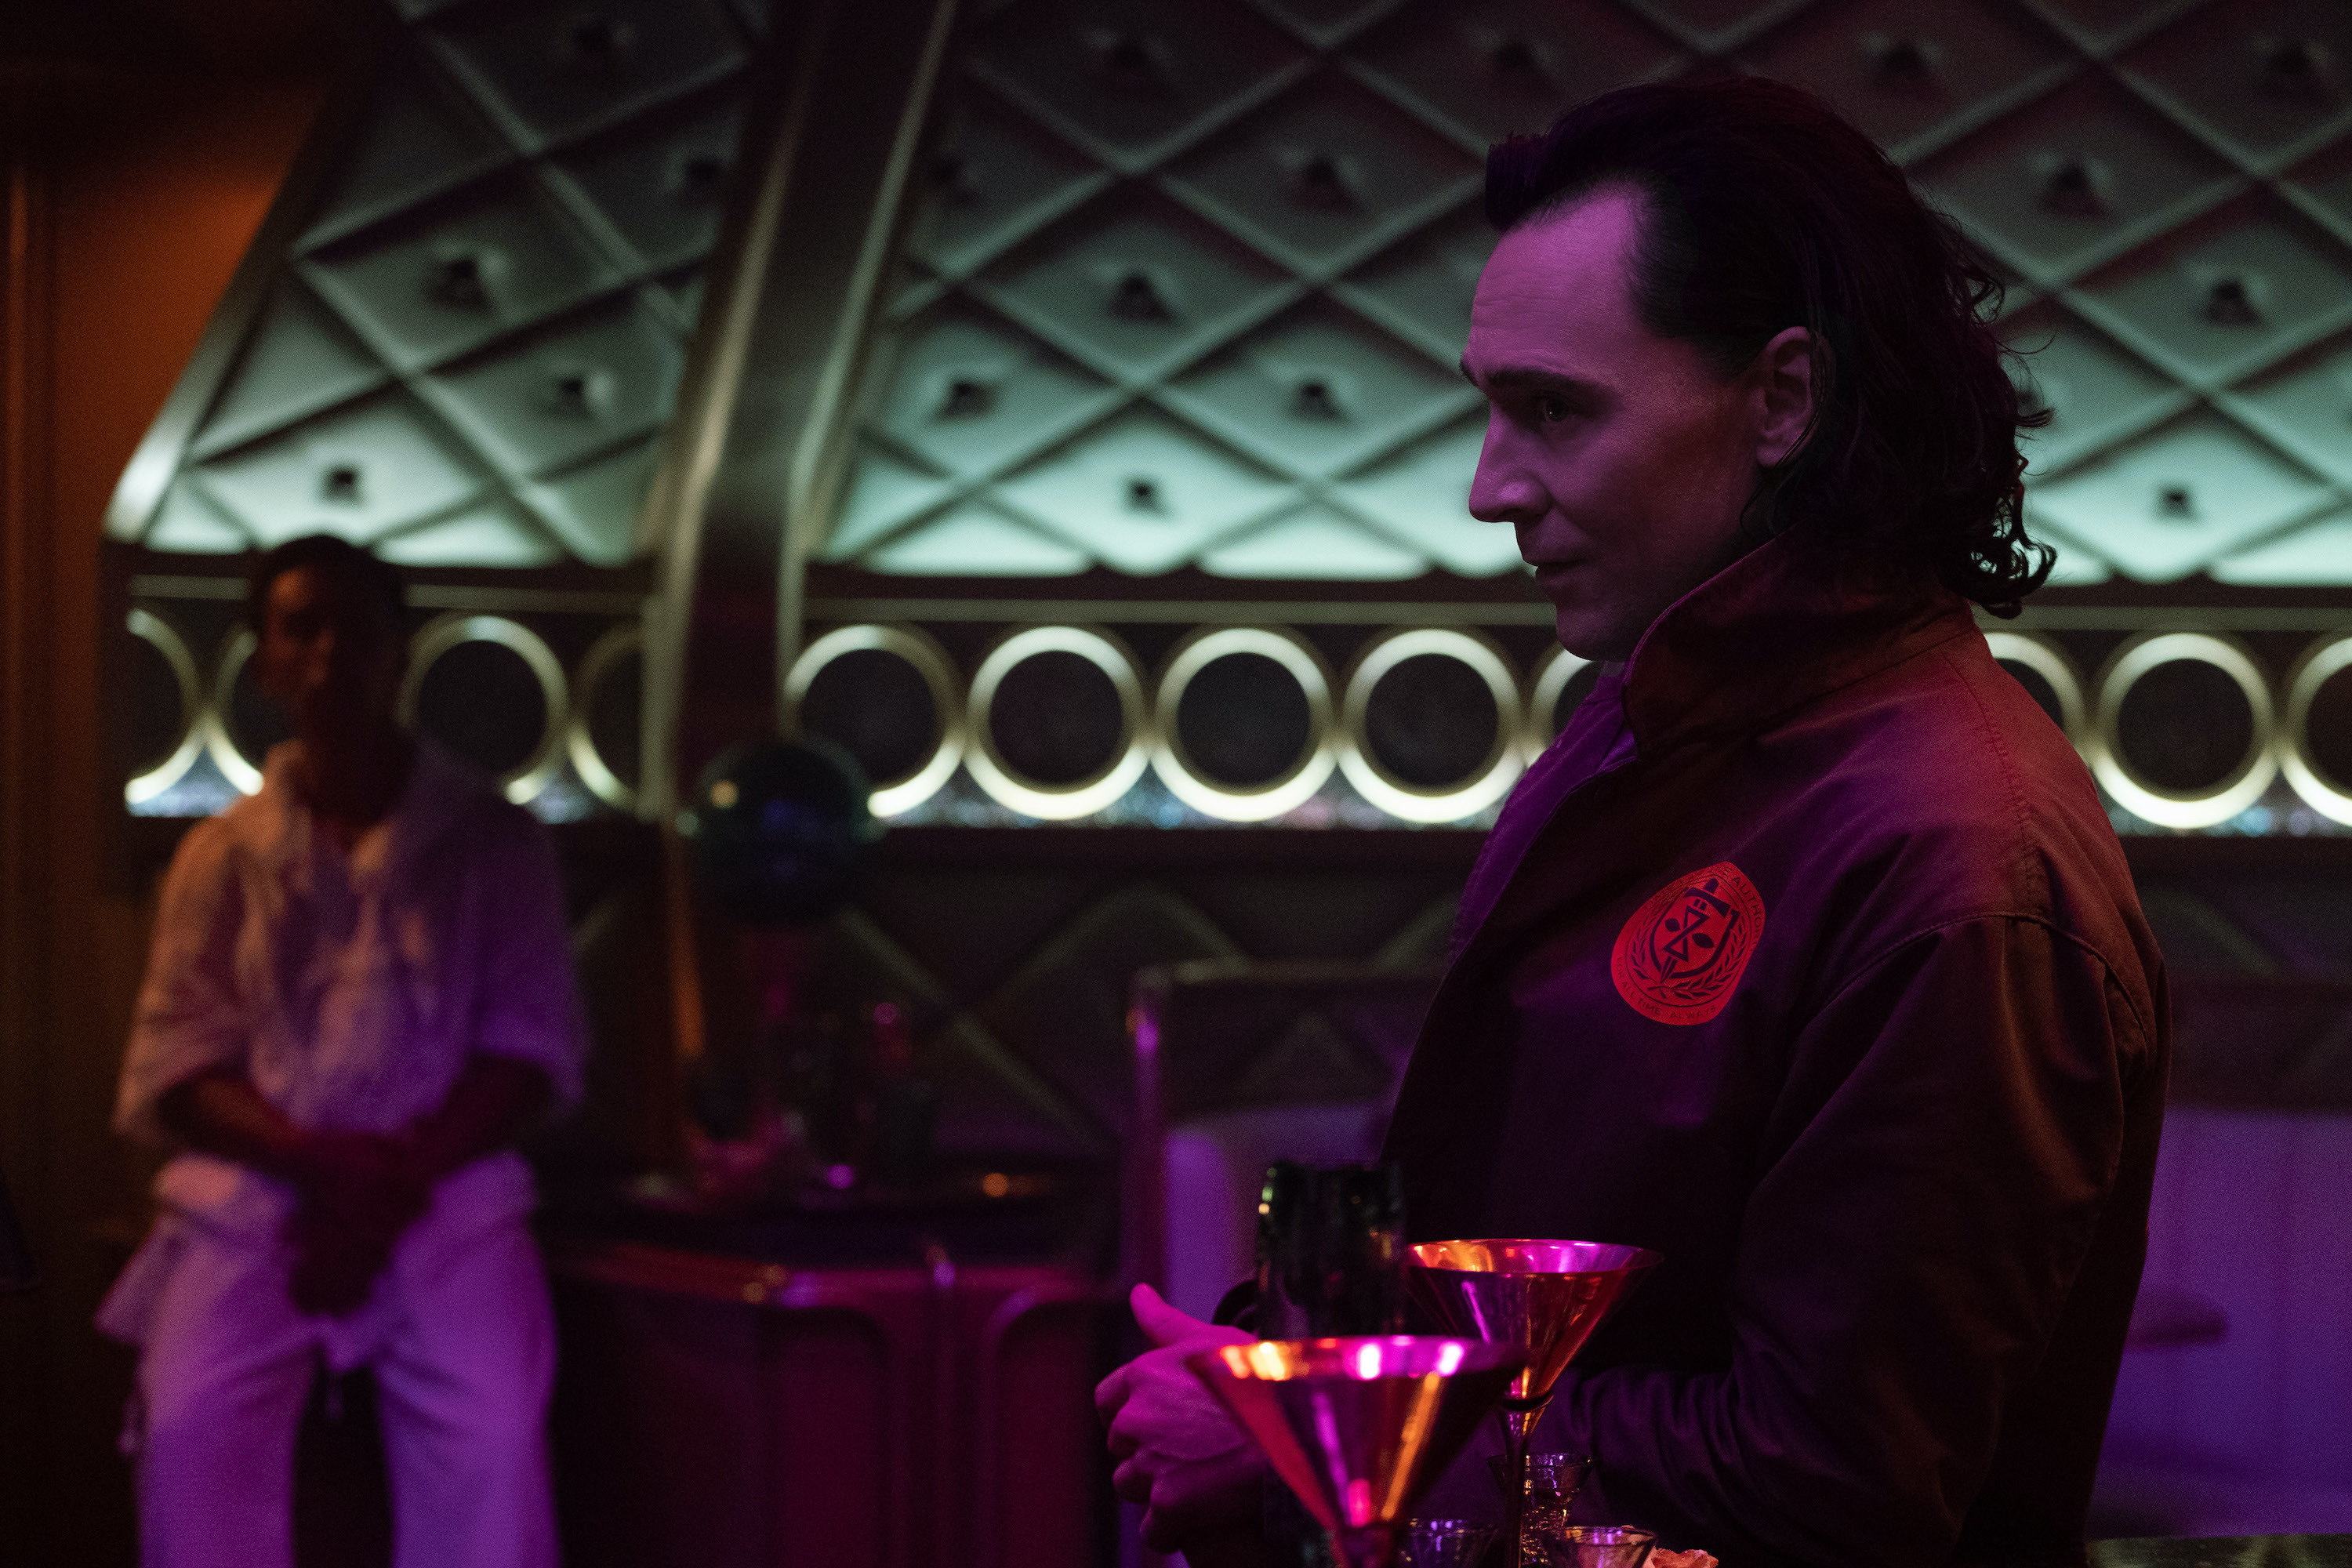 Loki slightly smirks while standing at a bar